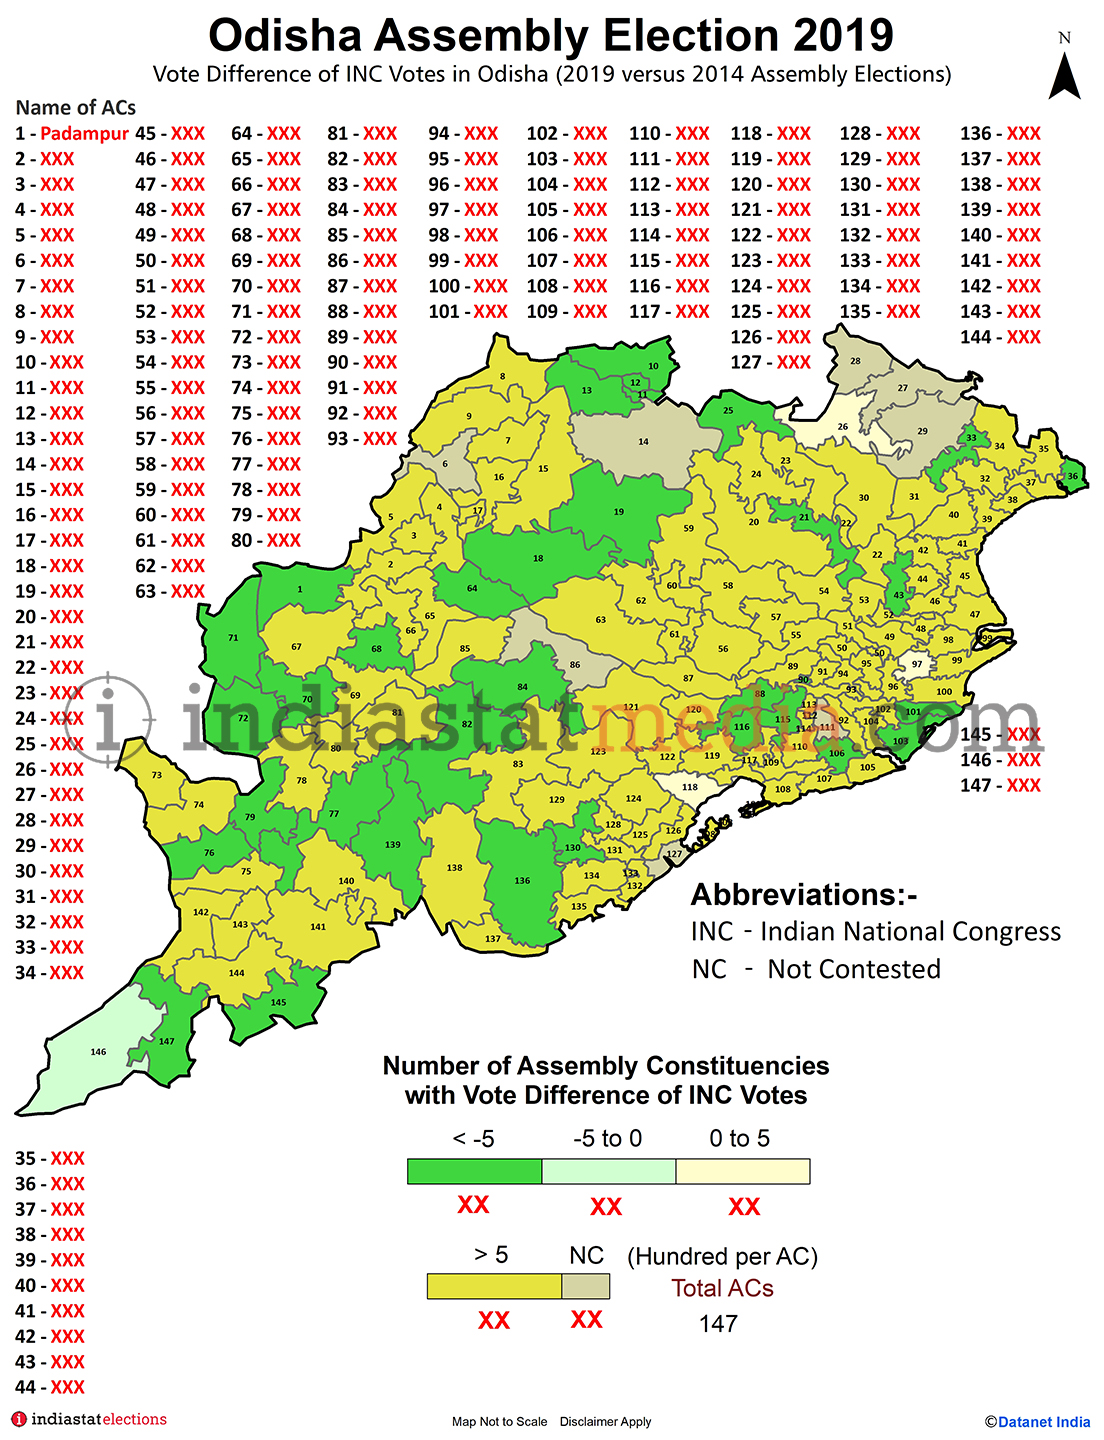 Assembly Constituencies with Vote Difference of INC Votes in Odisha (Assembly Elections - 2014 & 2019)